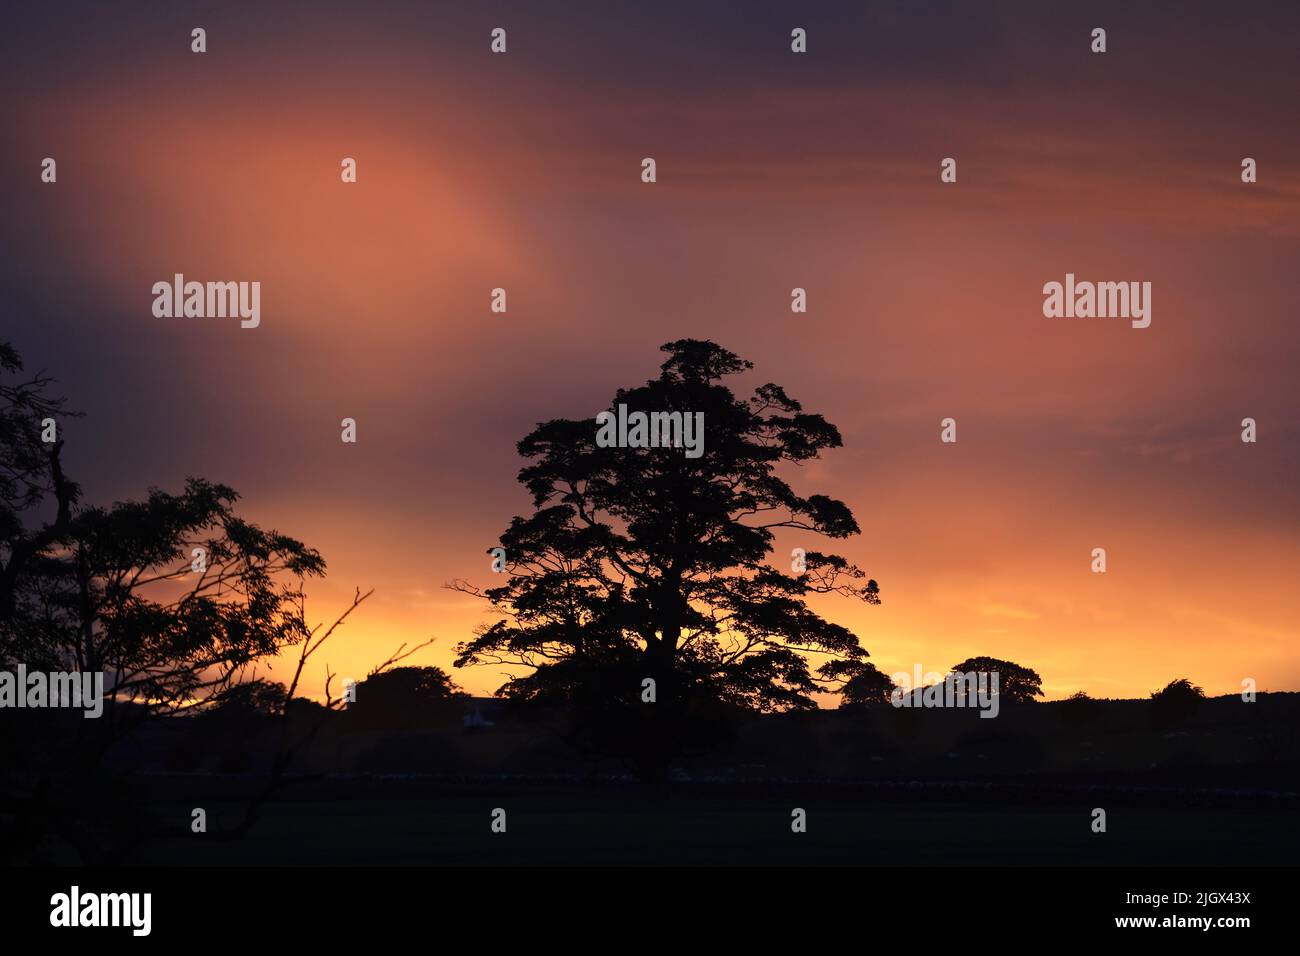 Colourful Post Sunset Sky, Teesdale, County Durham, Reino Unido Foto de stock